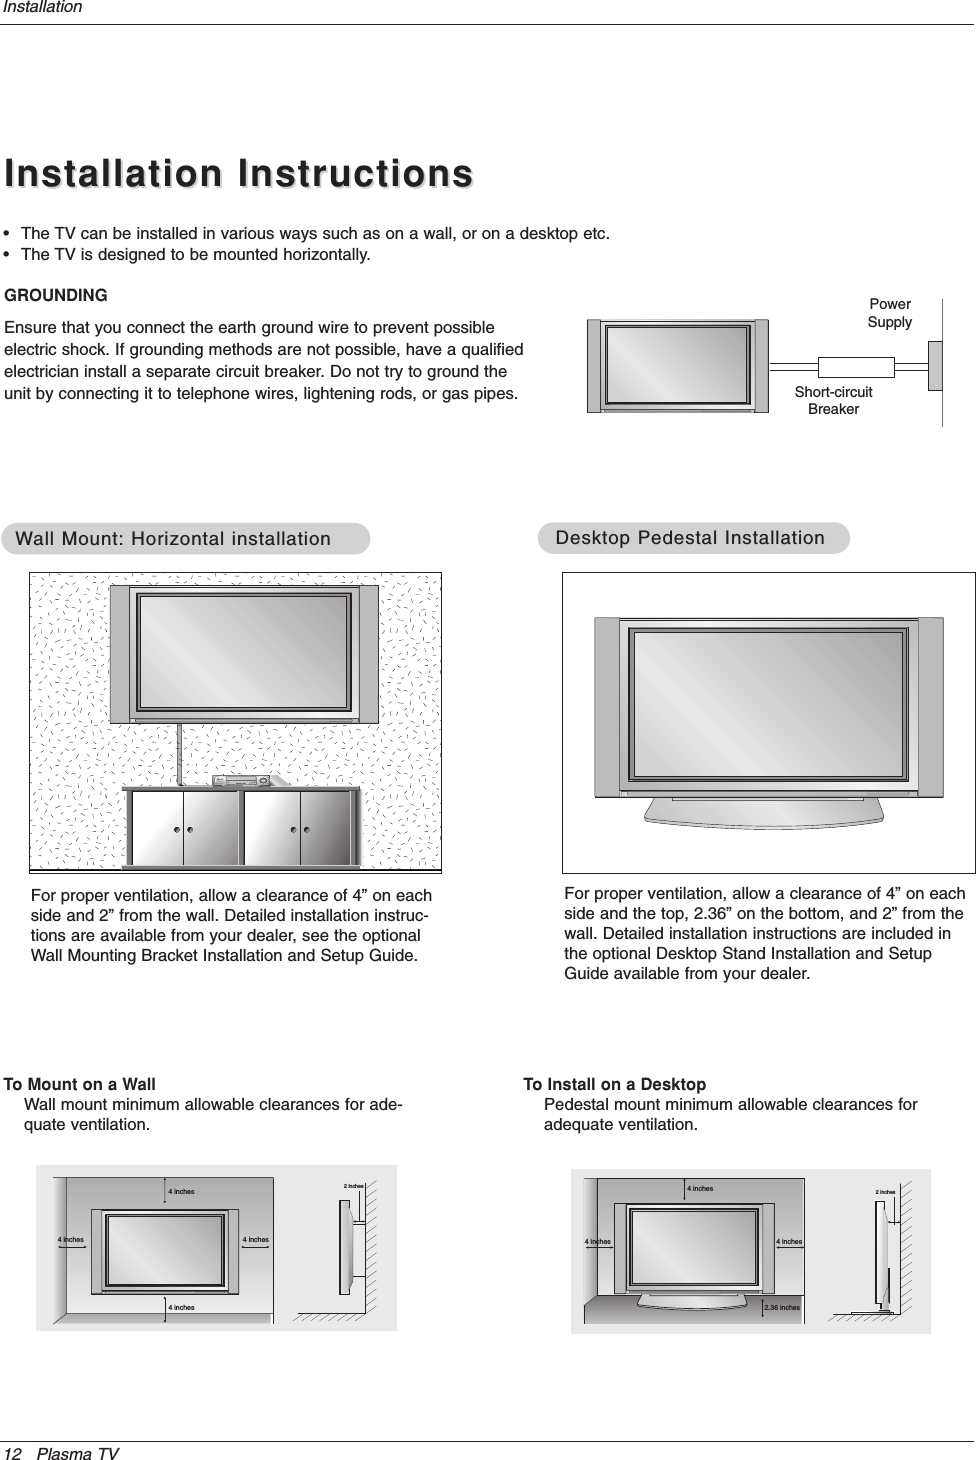 12 Plasma TVInstallationInstallation InstructionsInstallation Instructions•The TV can be installed in various ways such as on a wall, or on a desktop etc.•The TV is designed to be mounted horizontally. GROUNDINGEnsure that you connect the earth ground wire to prevent possibleelectric shock. If grounding methods are not possible, have a qualifiedelectrician install a separate circuit breaker. Do not try to ground theunit by connecting it to telephone wires, lightening rods, or gas pipes.PowerSupplyShort-circuitBreaker4 inches4 inches4 inches4 inches2 inchesWWall Mount: Horizontal installationall Mount: Horizontal installationFor proper ventilation, allow a clearance of 4” on eachside and 2” from the wall. Detailed installation instruc-tions are available from your dealer, see the optionalWall Mounting Bracket Installation and Setup Guide.4 inches4 inches2.36 inches4 inches2 inchesDesktop Pedestal InstallationDesktop Pedestal InstallationFor proper ventilation, allow a clearance of 4” on eachside and the top, 2.36” on the bottom, and 2” from thewall. Detailed installation instructions are included inthe optional Desktop Stand Installation and SetupGuide available from your dealer.To Mount on a WallWall mount minimum allowable clearances for ade-quate ventilation.To Install on a DesktopPedestal mount minimum allowable clearances foradequate ventilation.